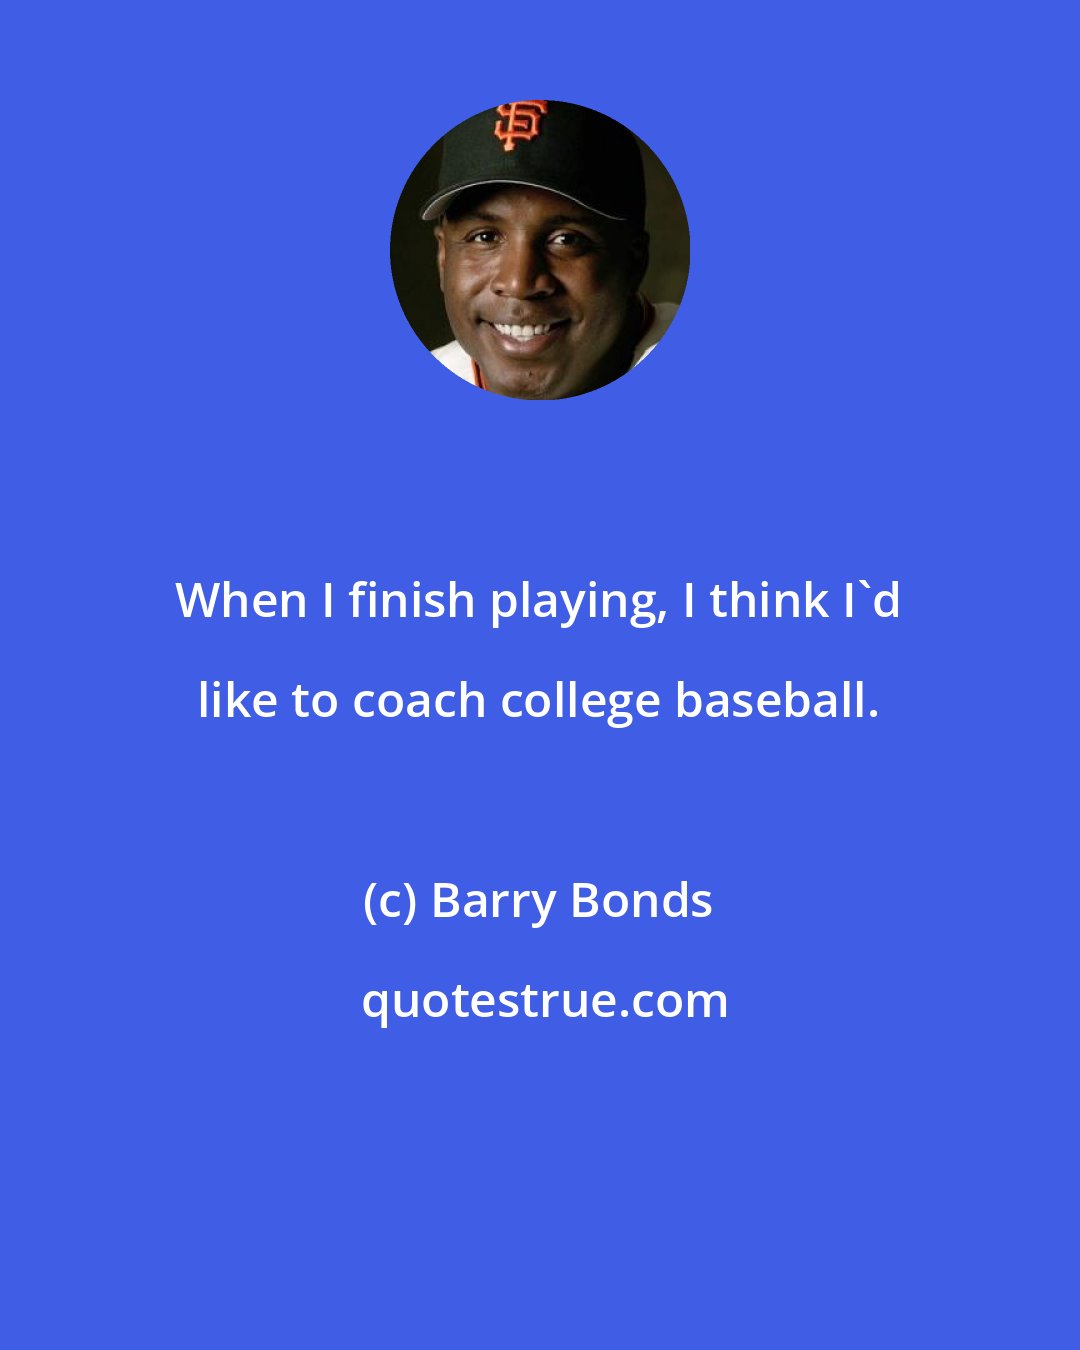 Barry Bonds: When I finish playing, I think I'd like to coach college baseball.